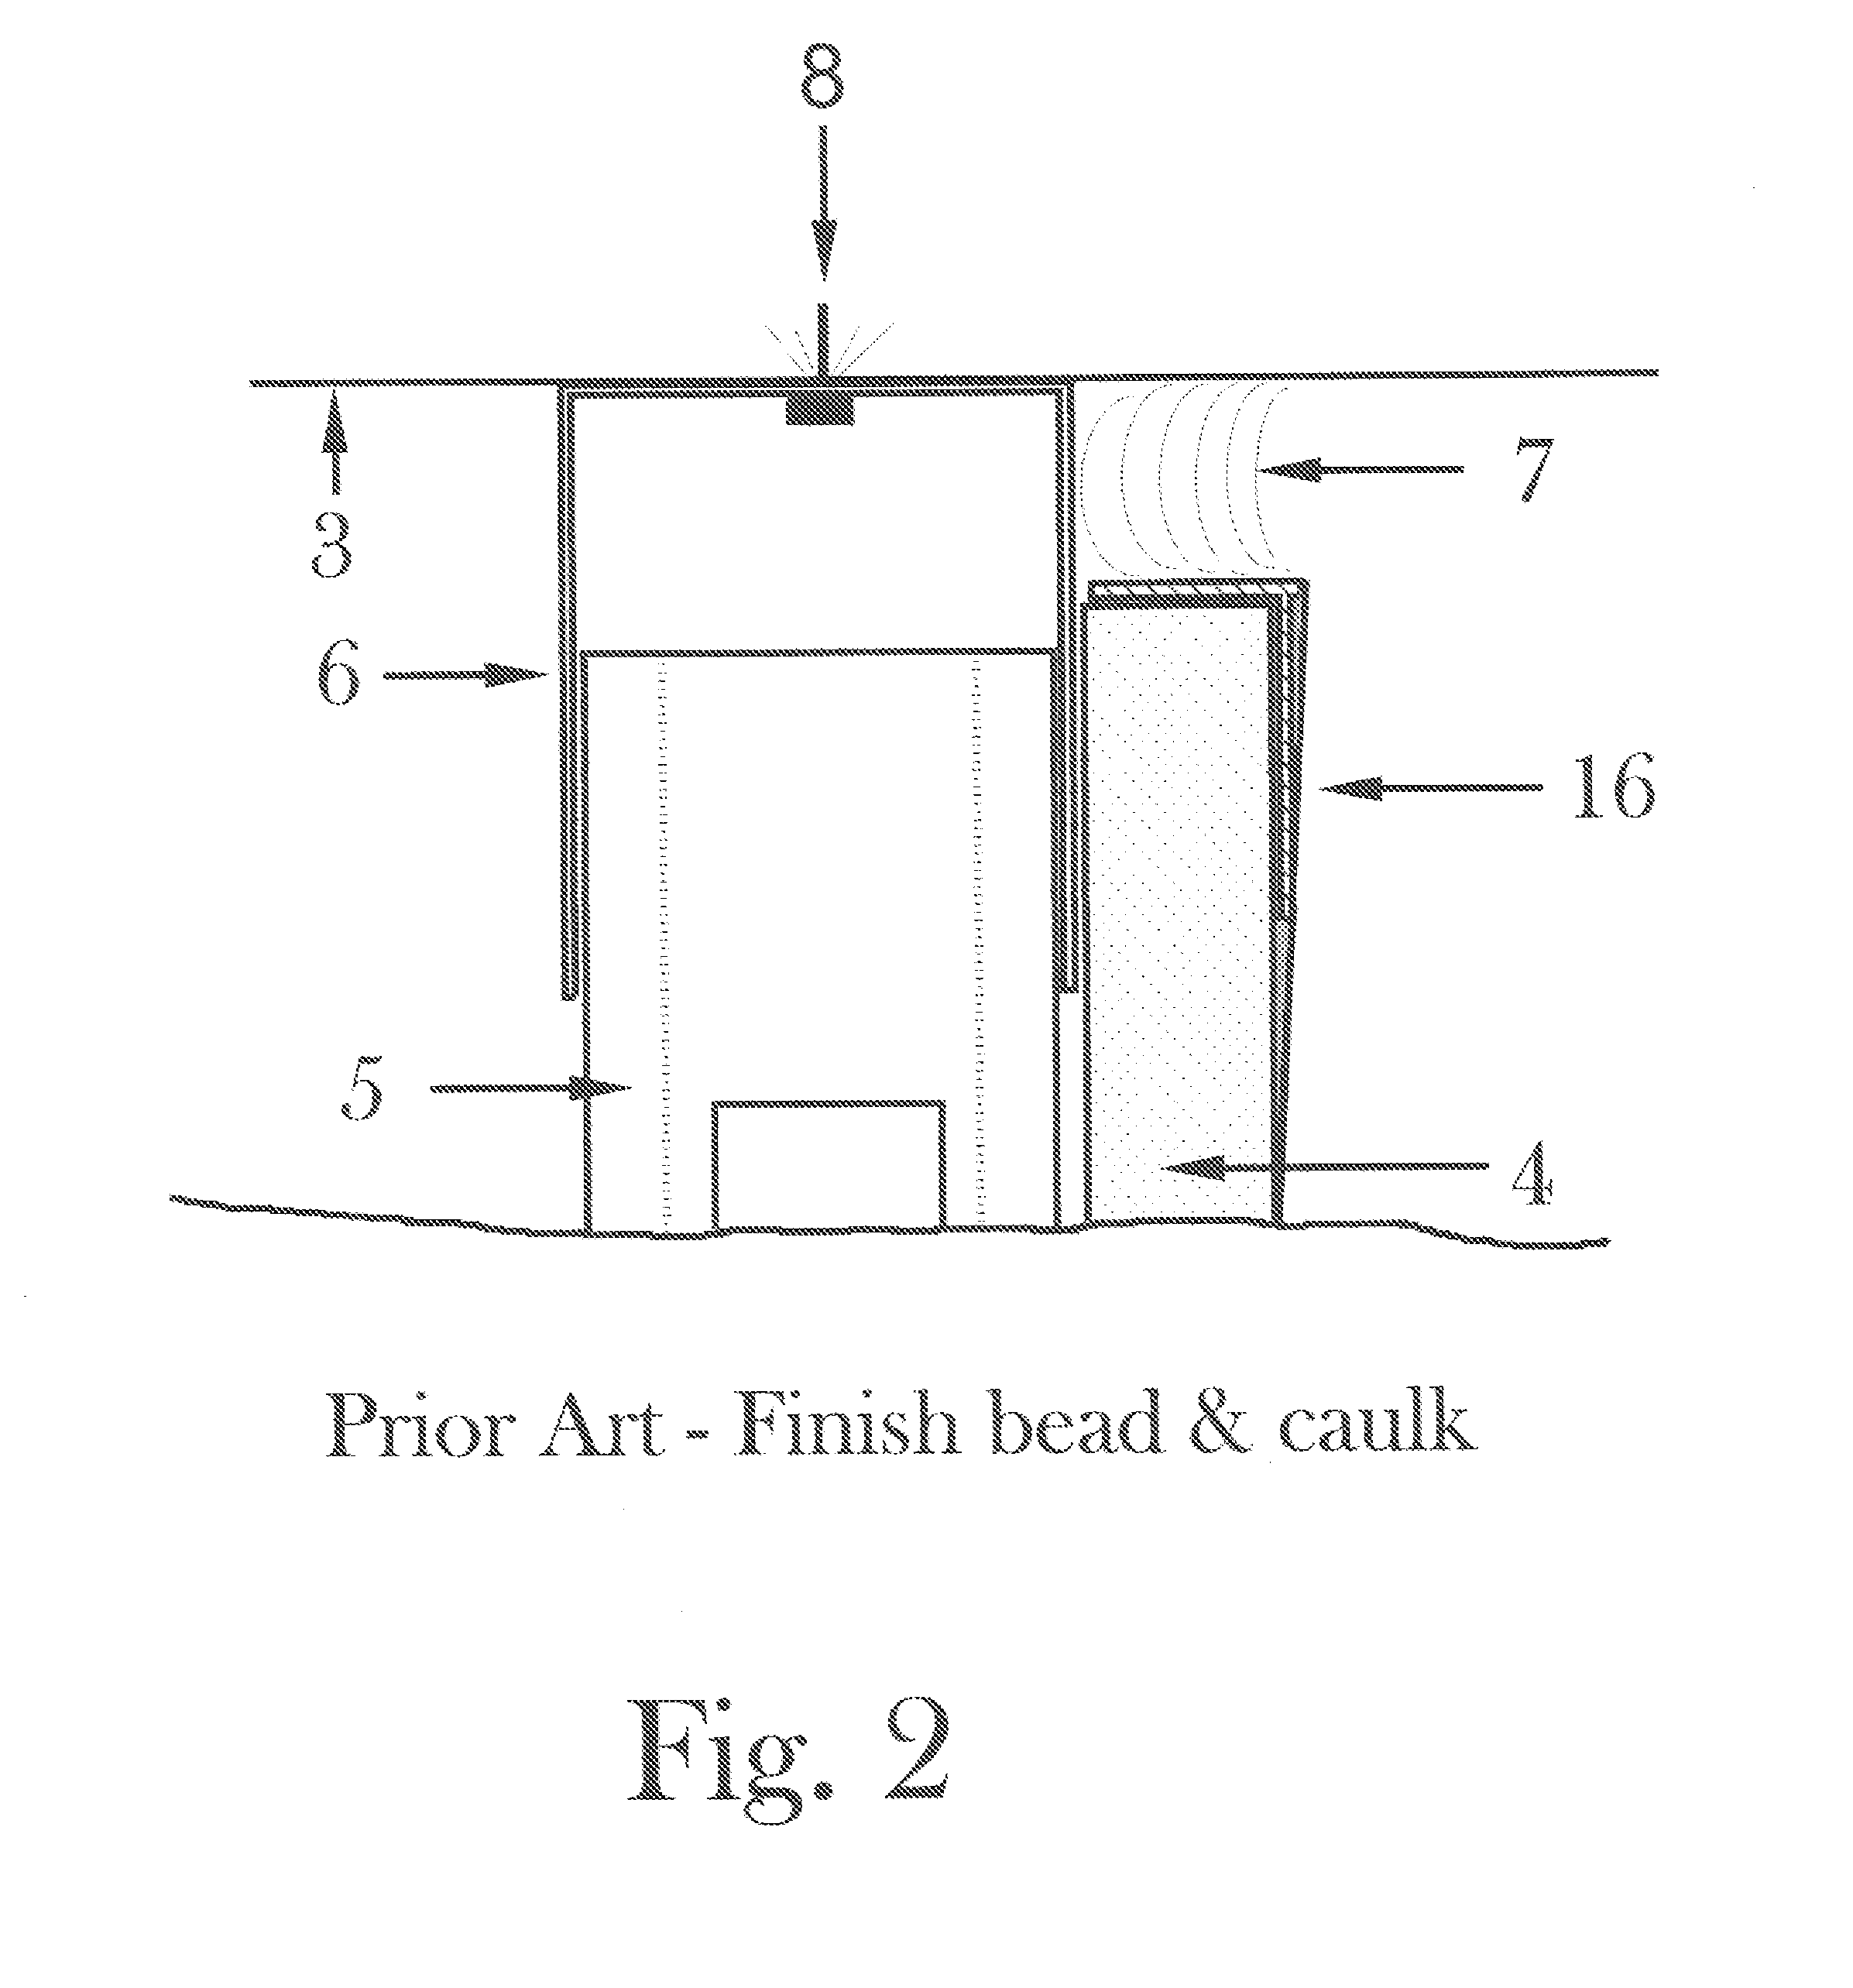 Self-adjusting trim assembly at flexible ceiling and stationary wall junction